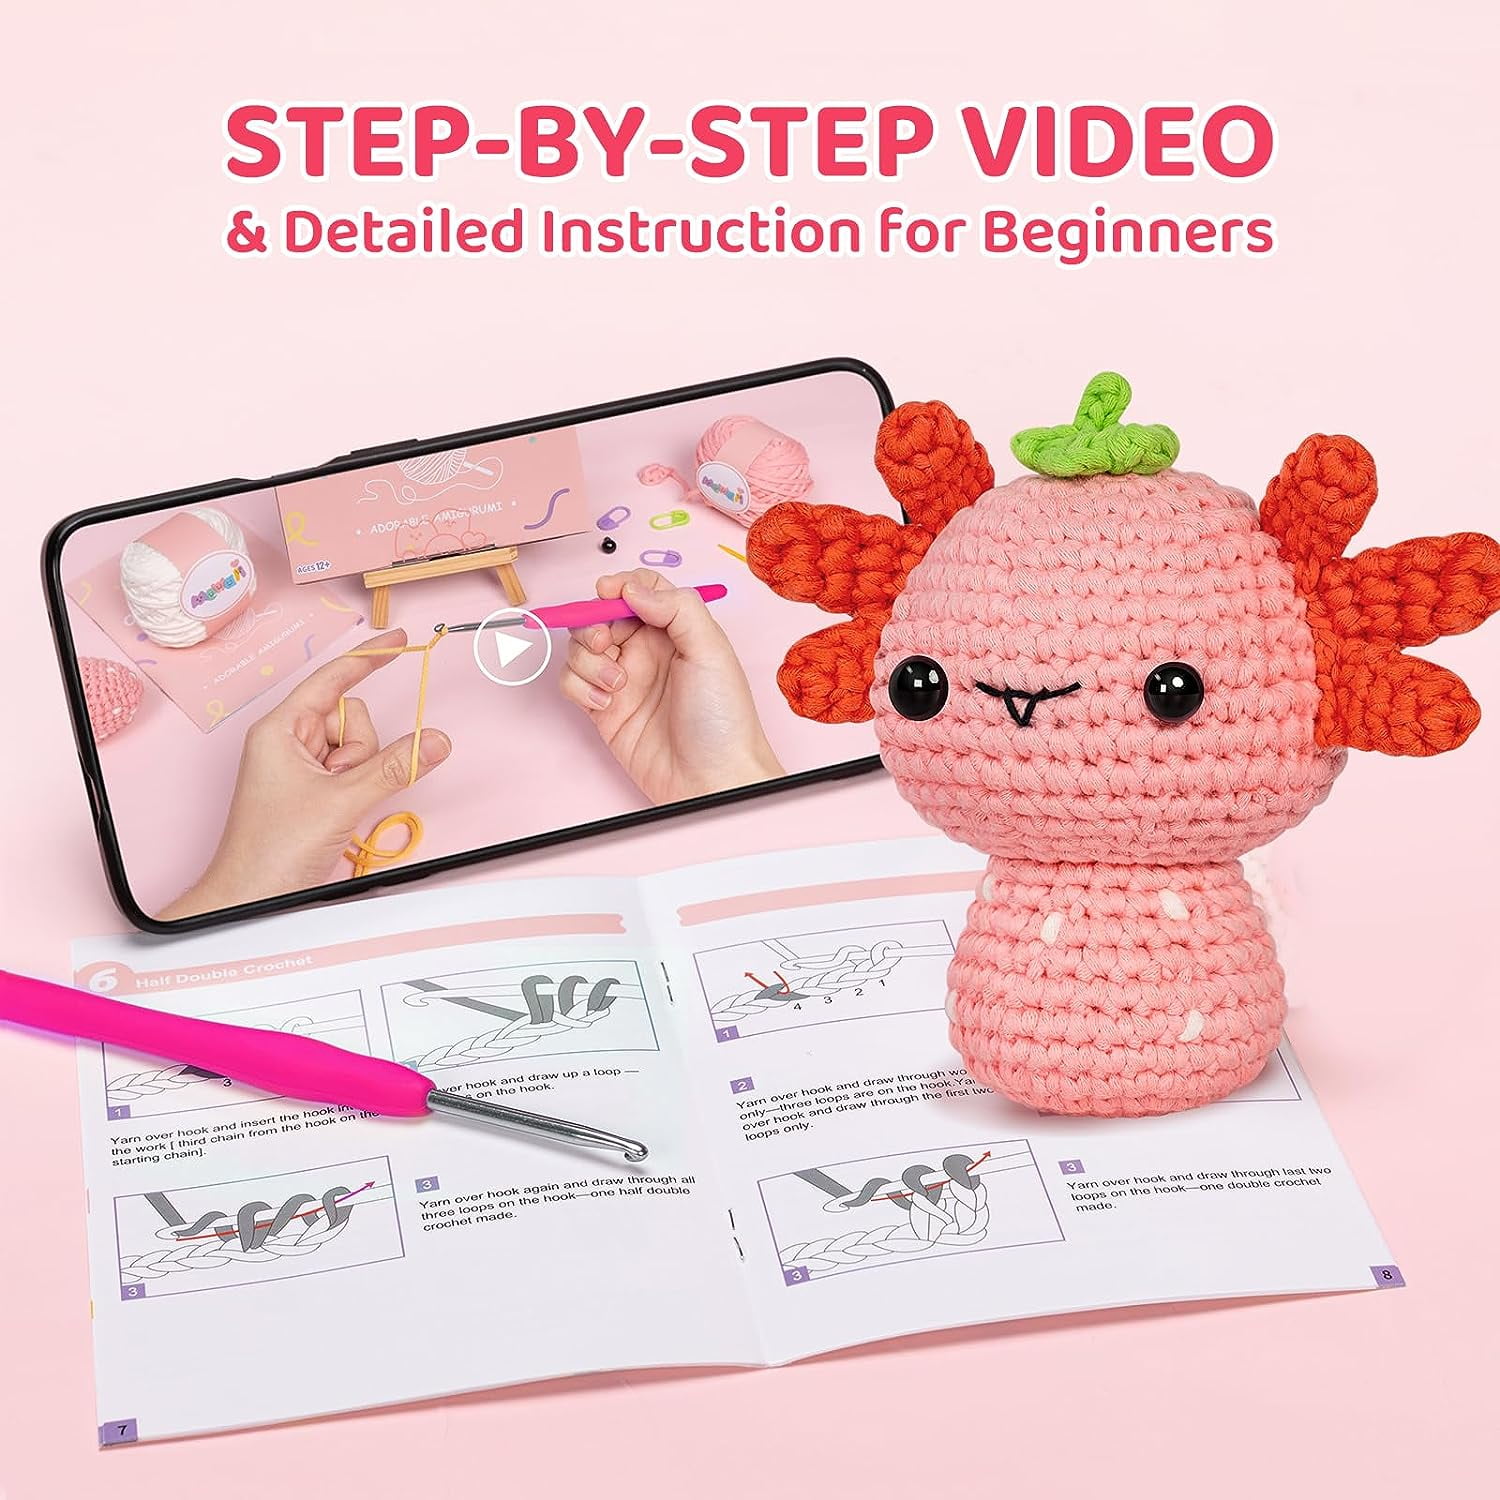 Restocked axolotl kits! Let's learn how to crochet together